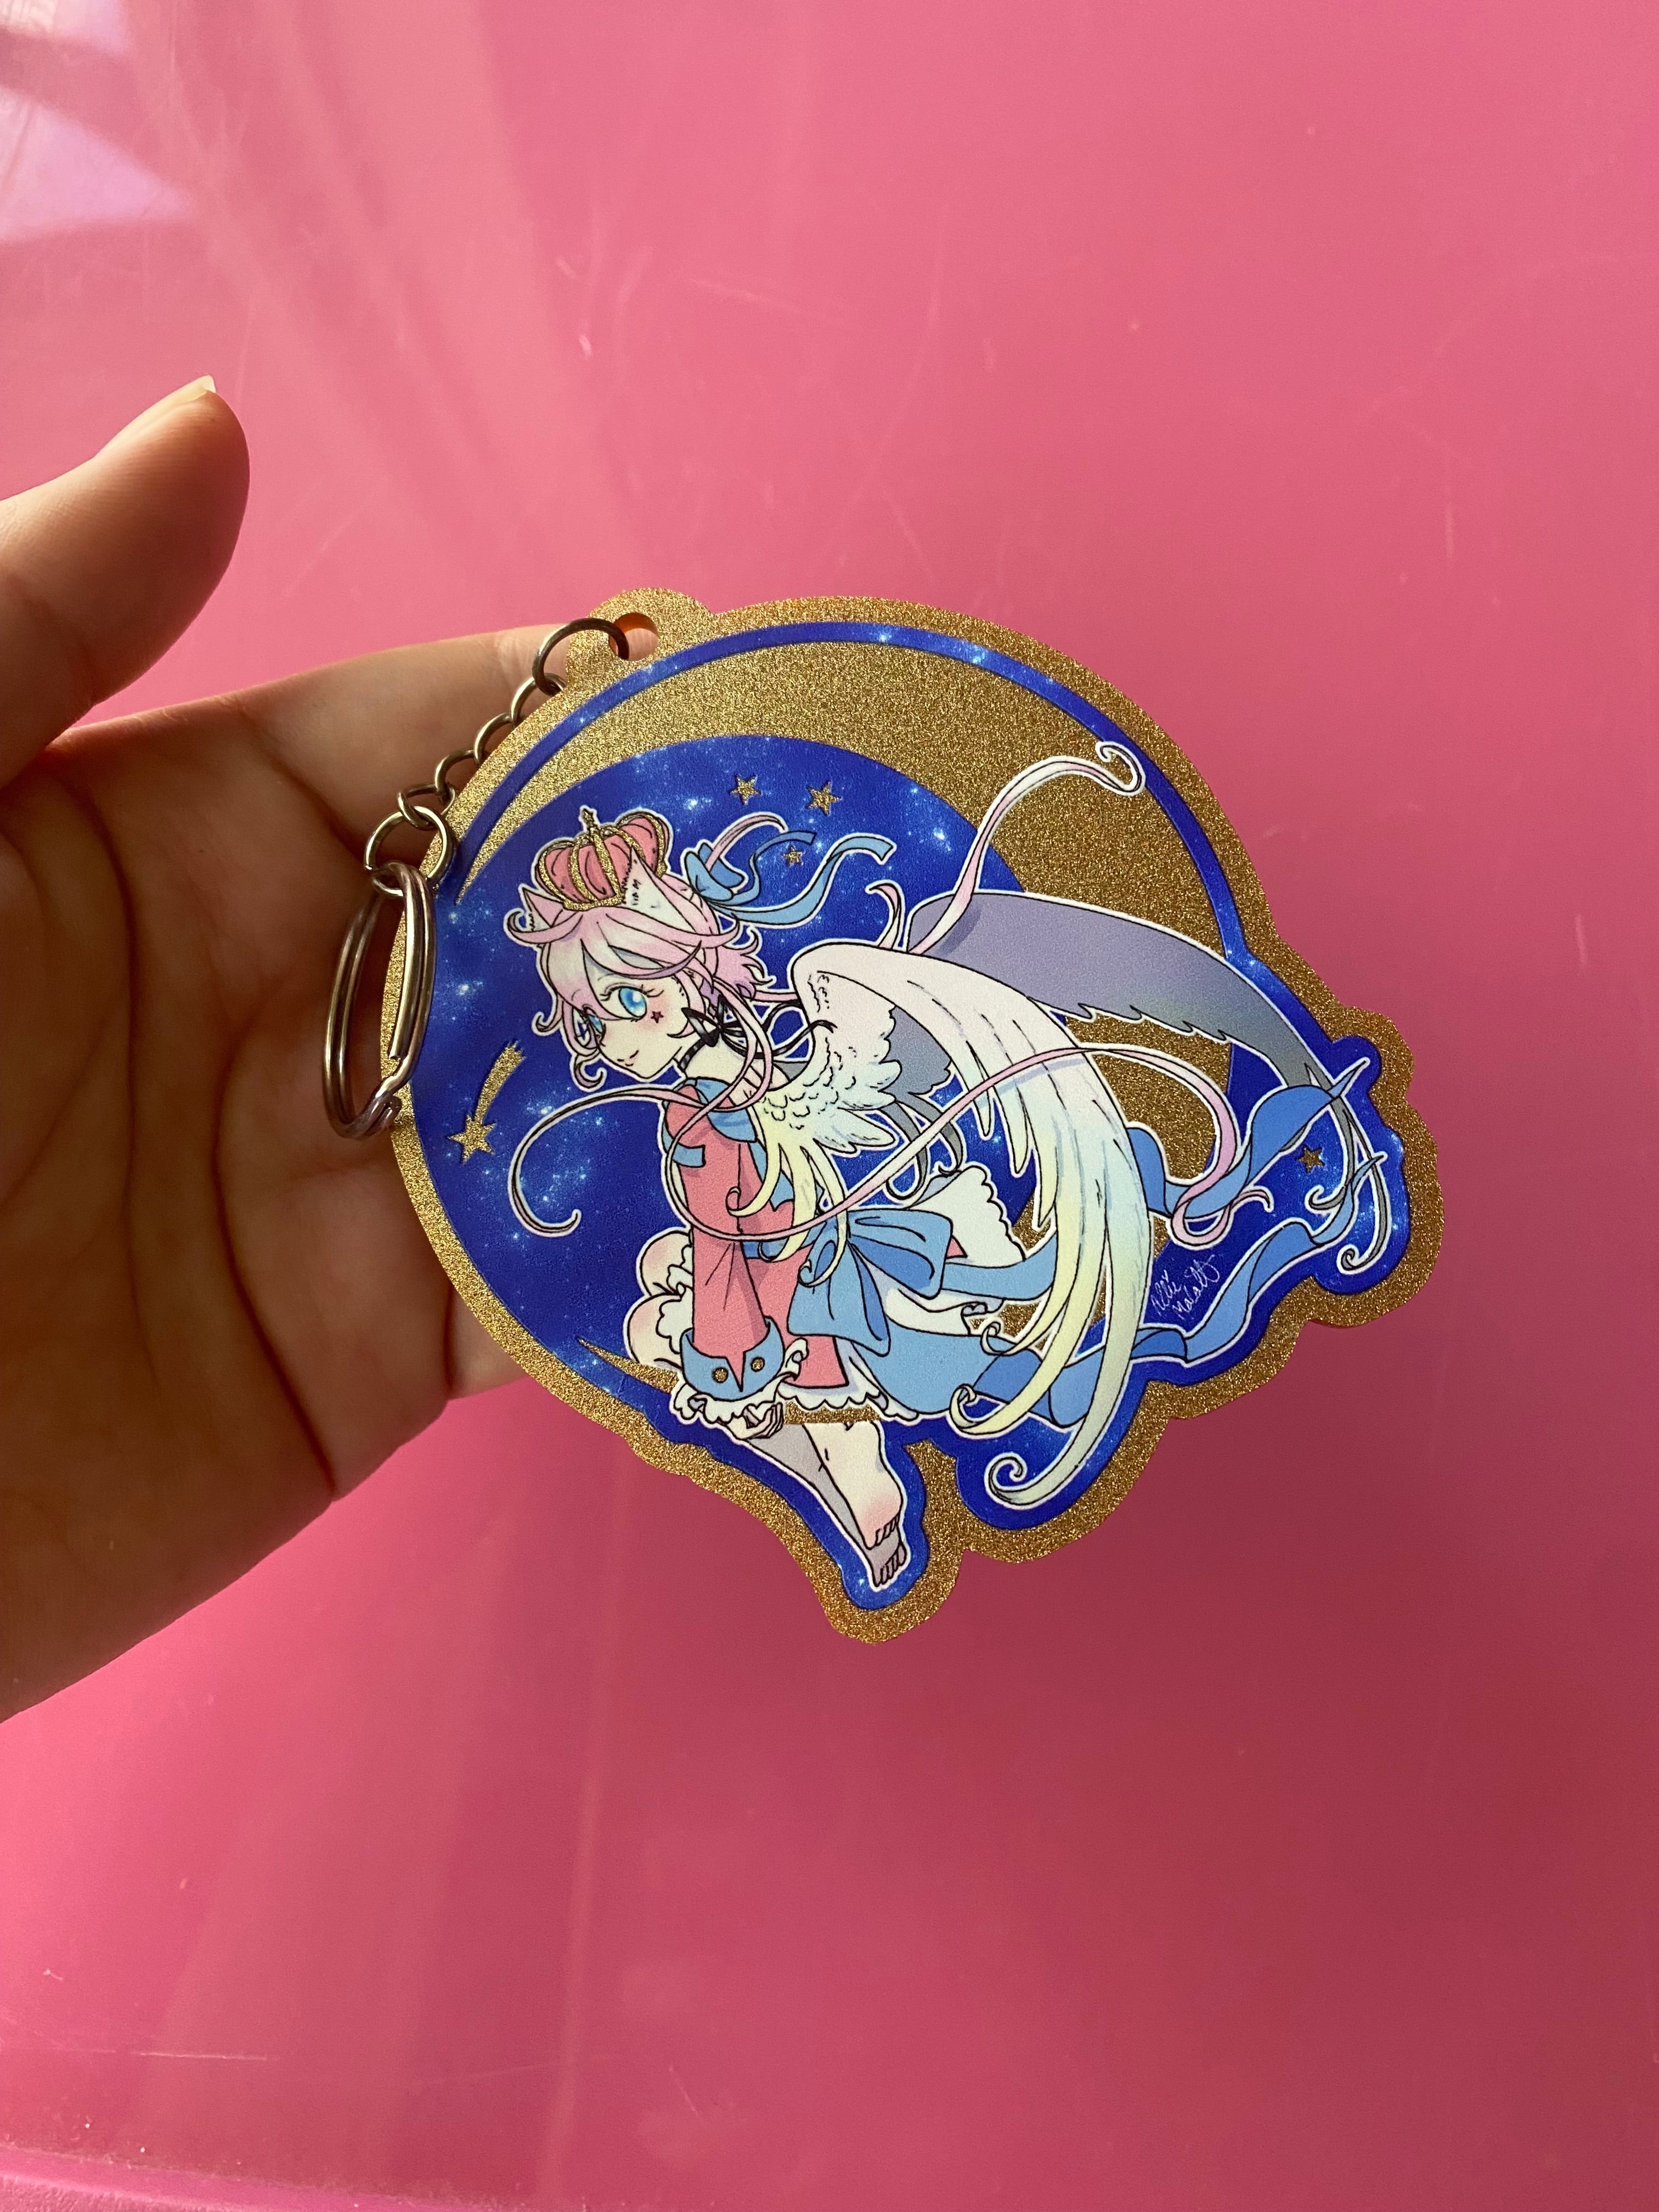 Magical girl angel sitting on the moon gold glitter acrylic charm keychain featuring original character from Magical Princess Sky manga